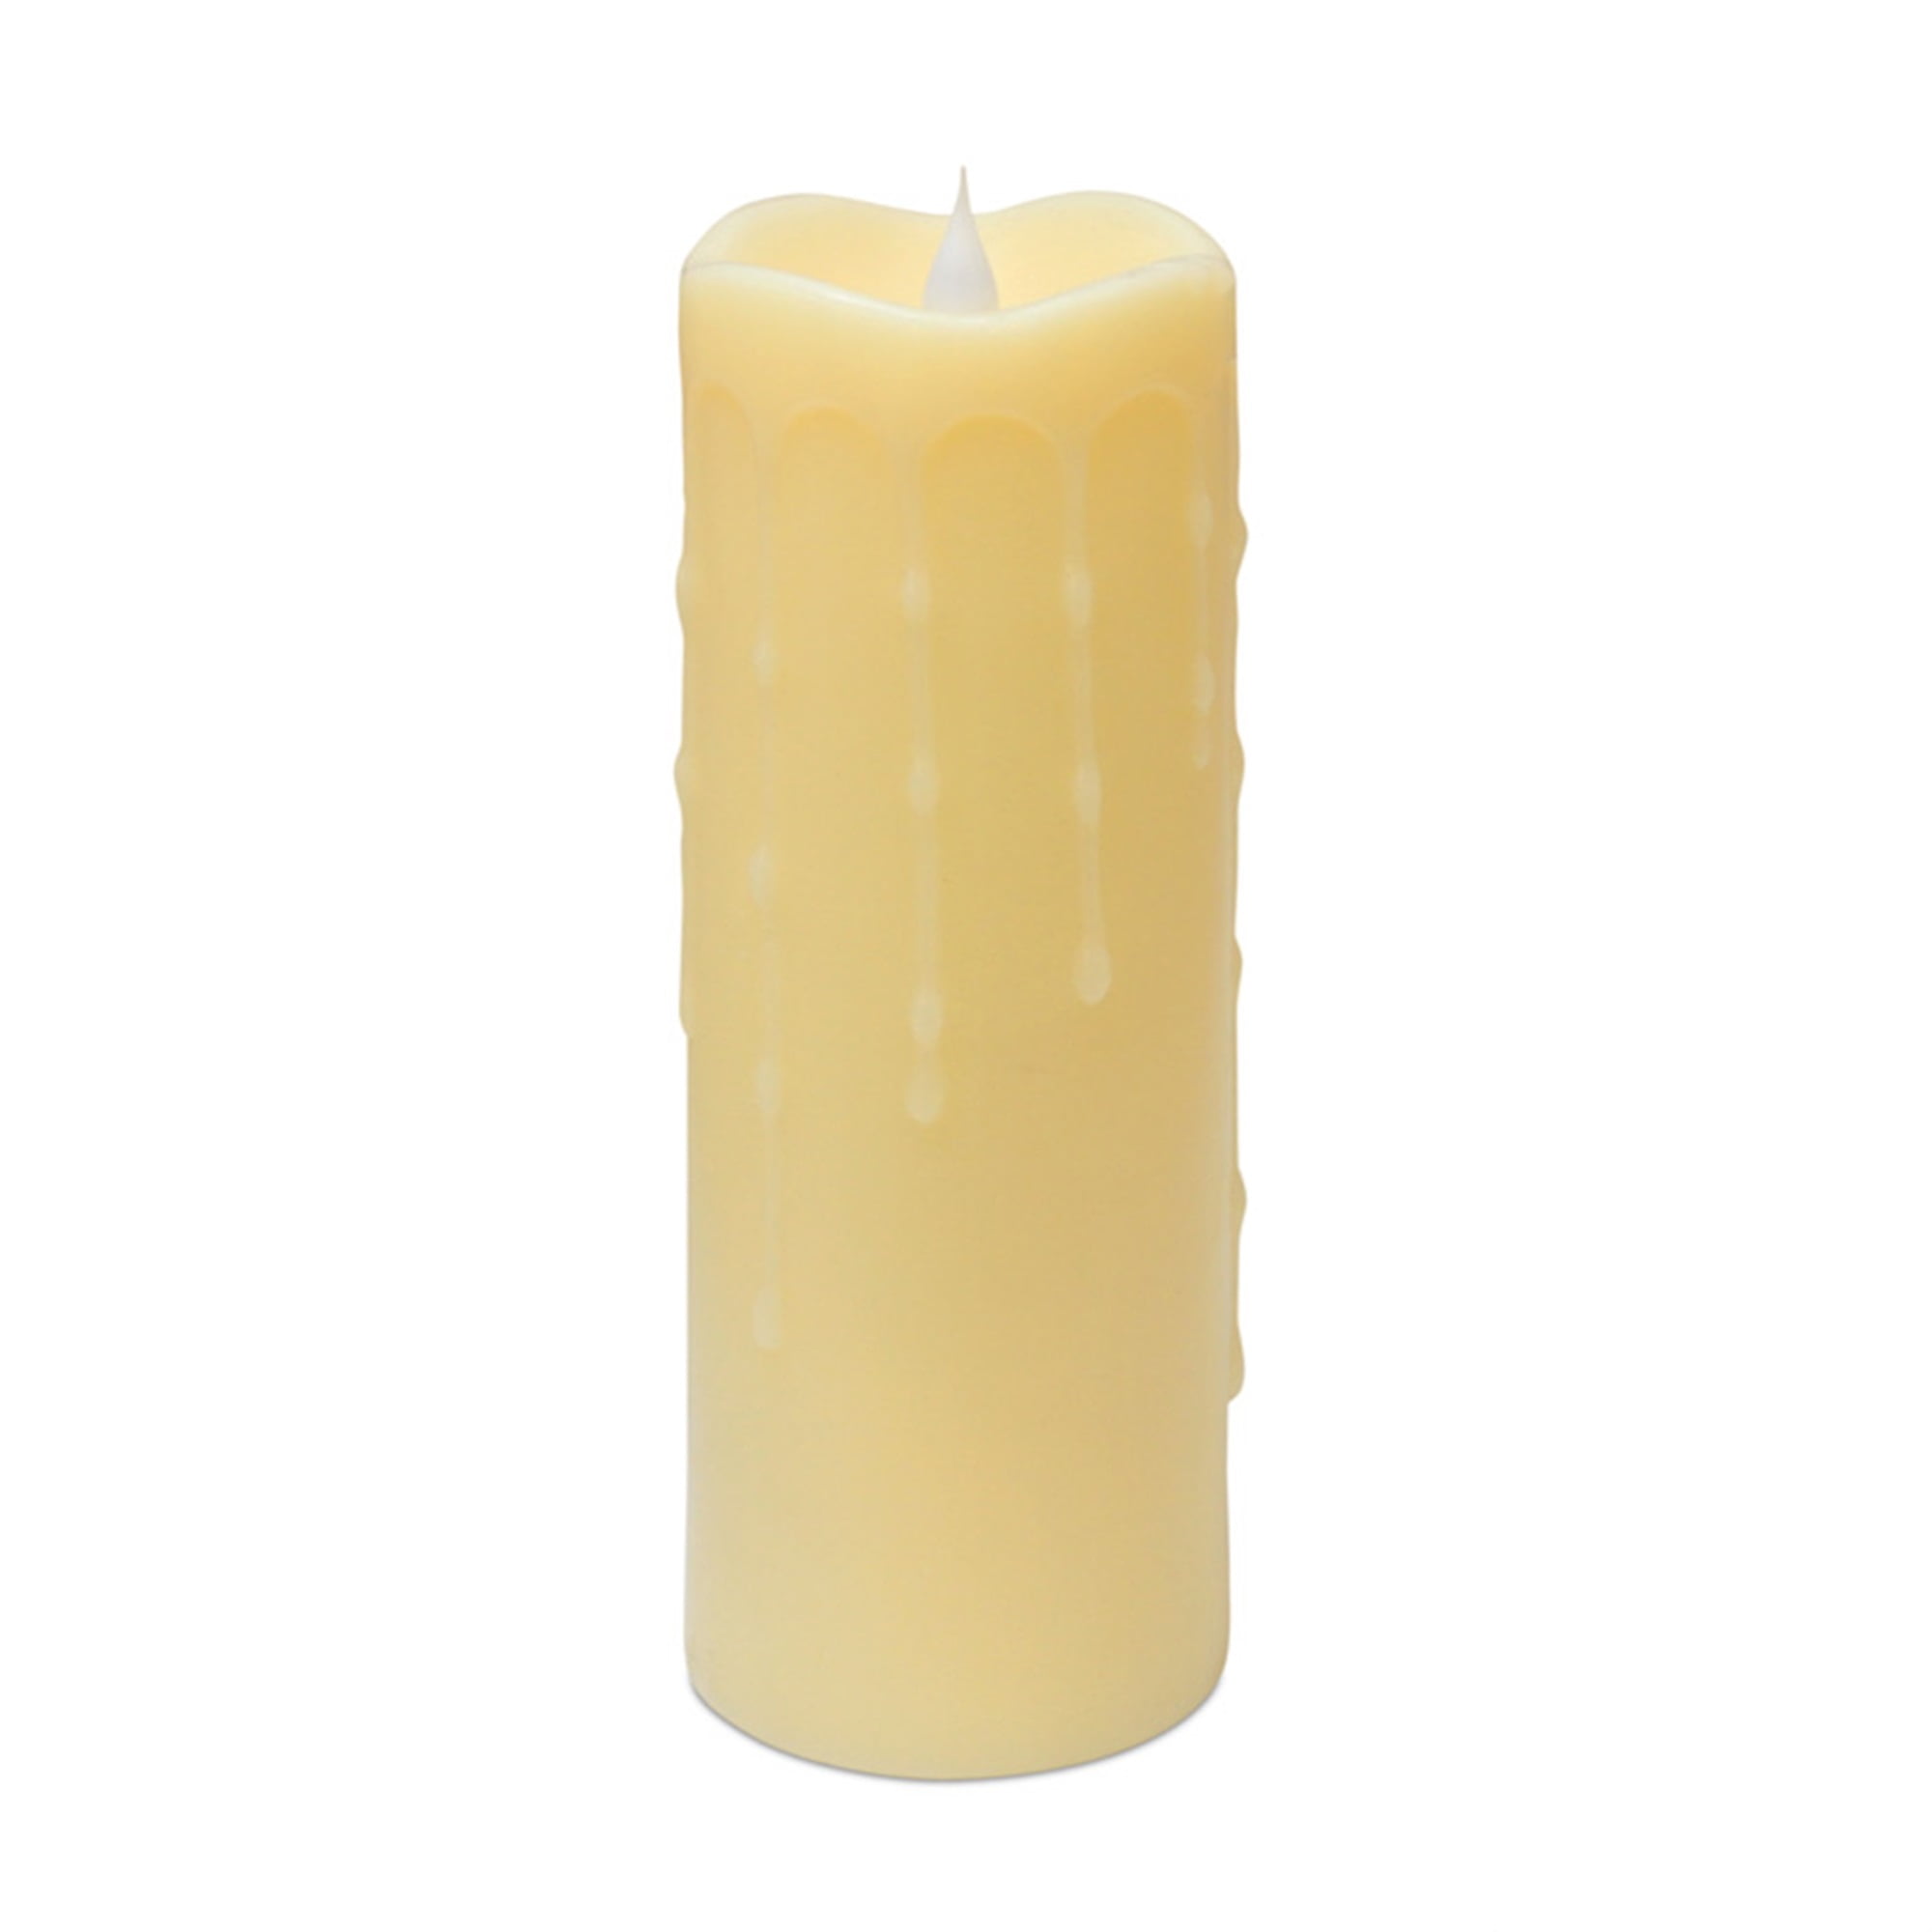 Simplux LED Dripping Candle w/Moving Flame (Set of 2) 3"D x 9"H